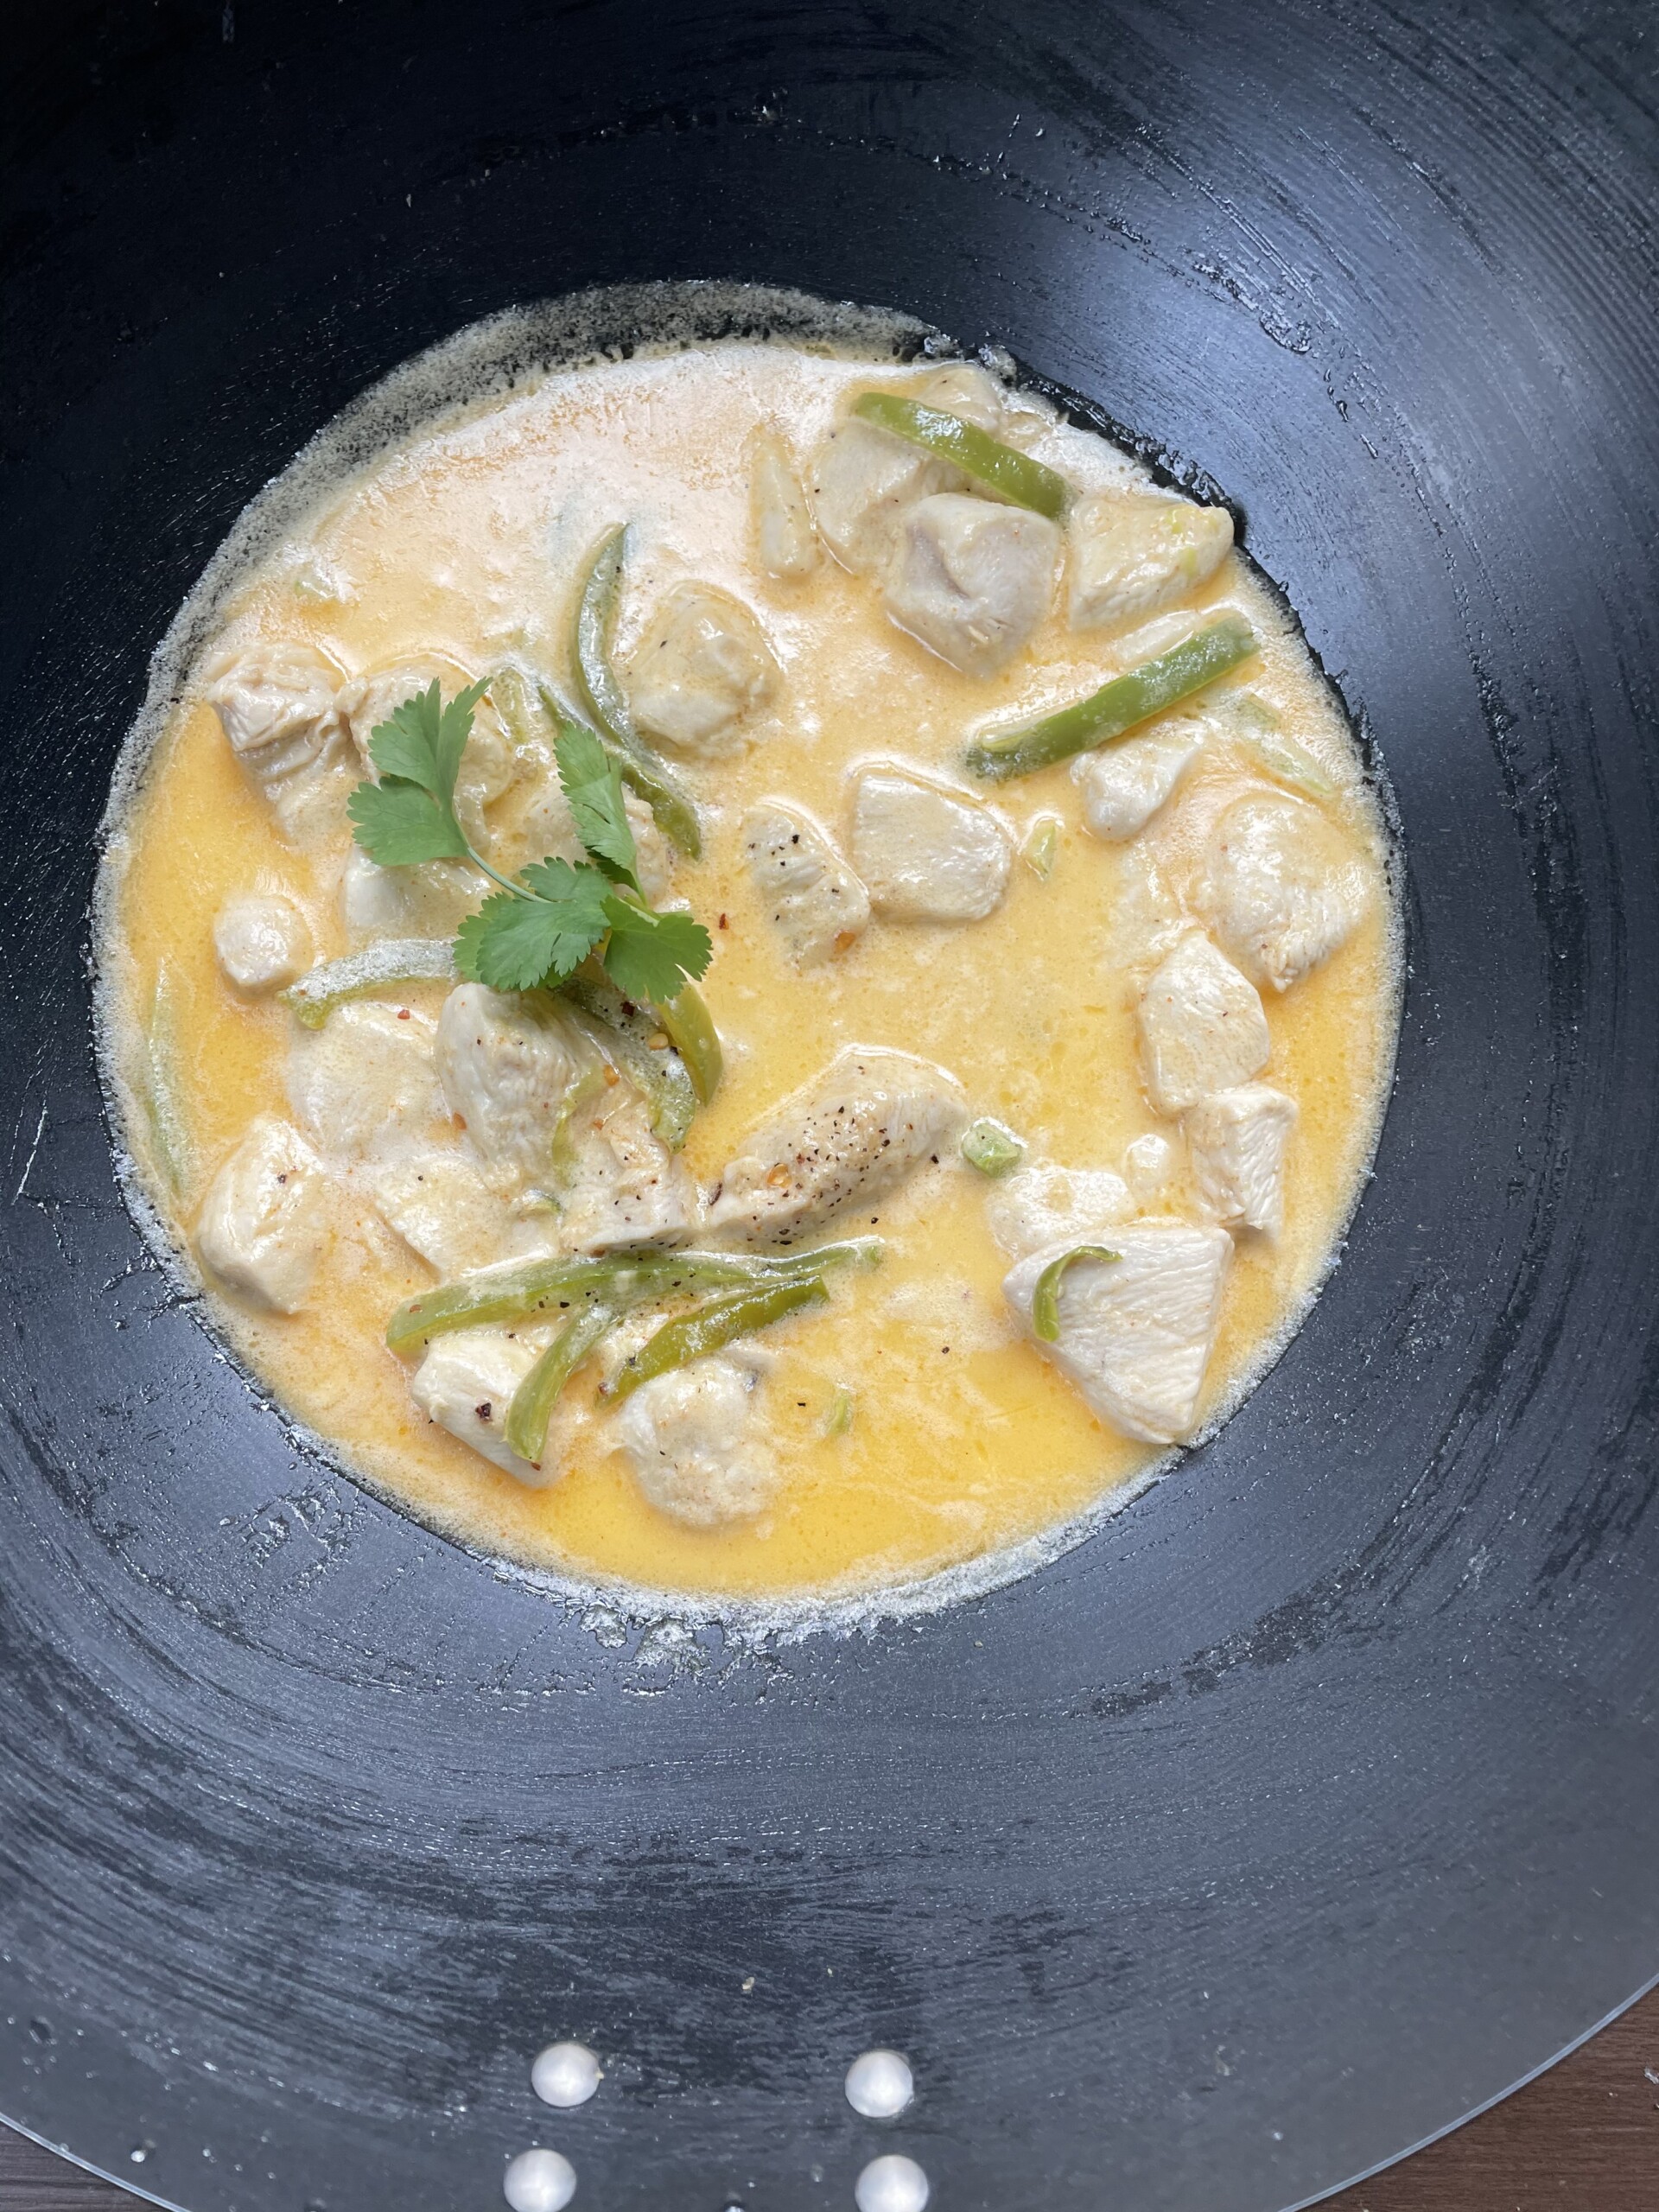 Reshmi Chicken Paneer with Green Bell Pepper and white creamy sauce from Pakistan